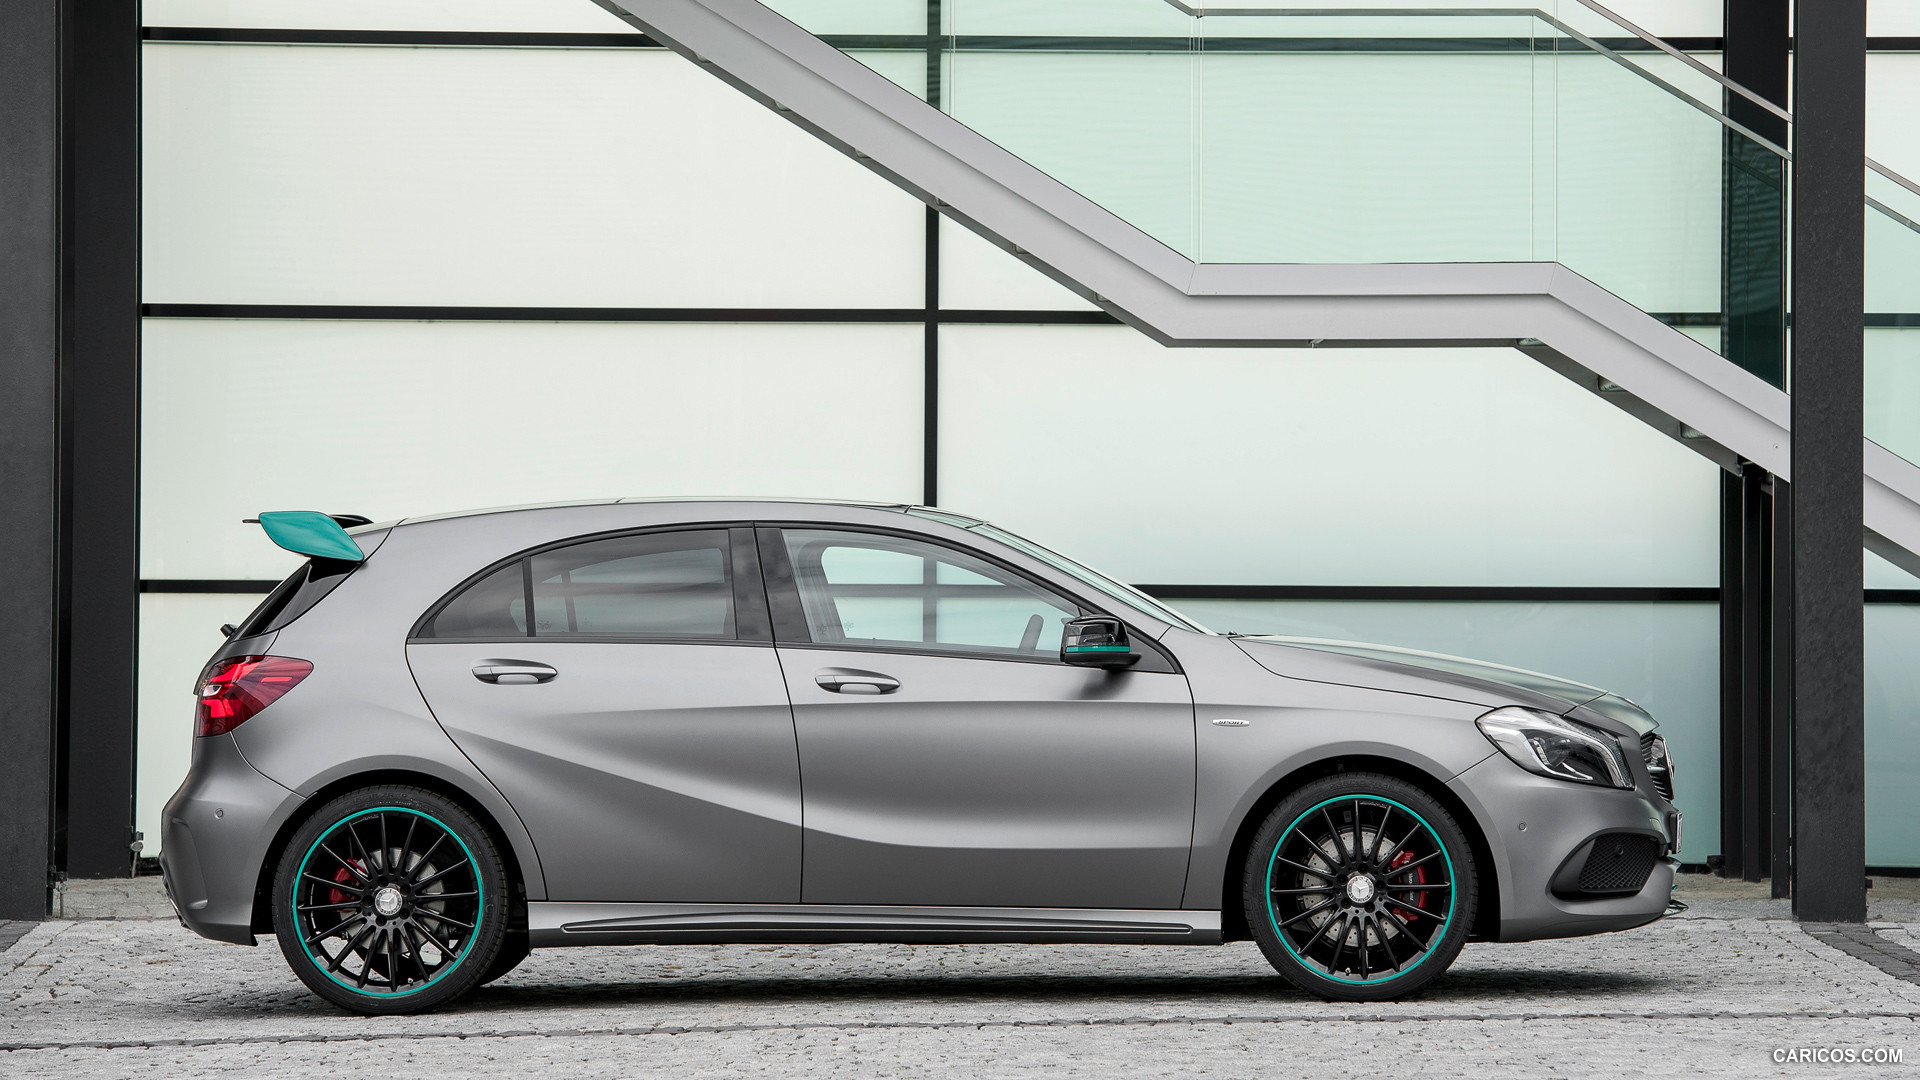 2016 Mercedes-Benz A-Class A 250 Motorsport Edition (Mountain Grey) - Side, #25 of 43